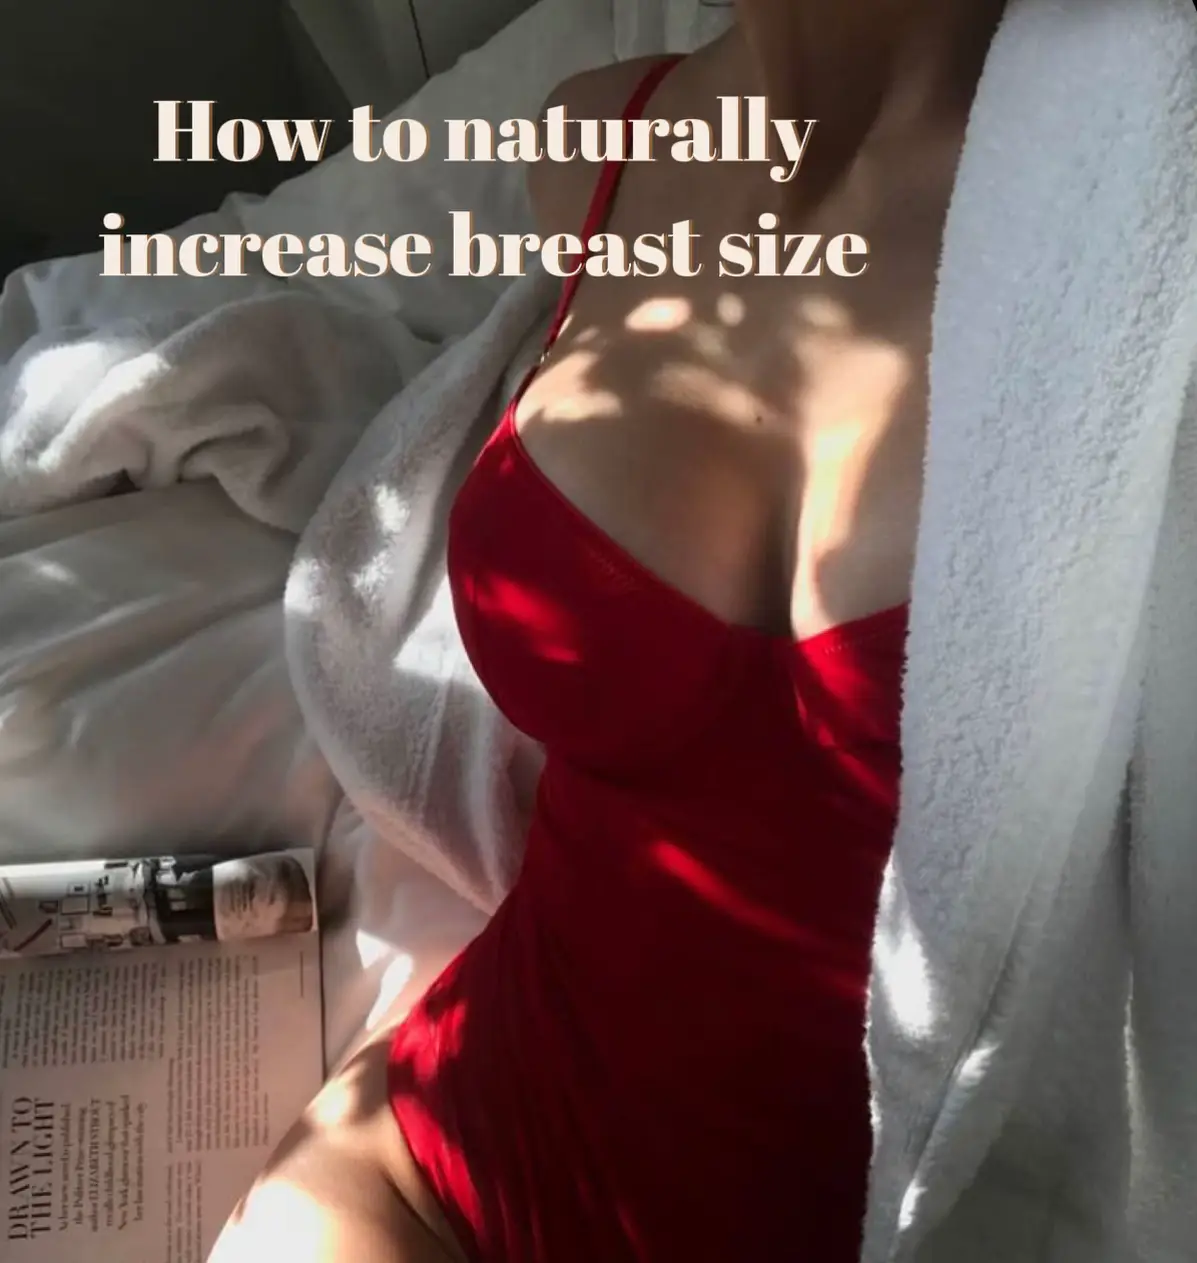 I've had DD cup boobs since puberty – they shrunk after I had kids, now I  can easily go bra-free